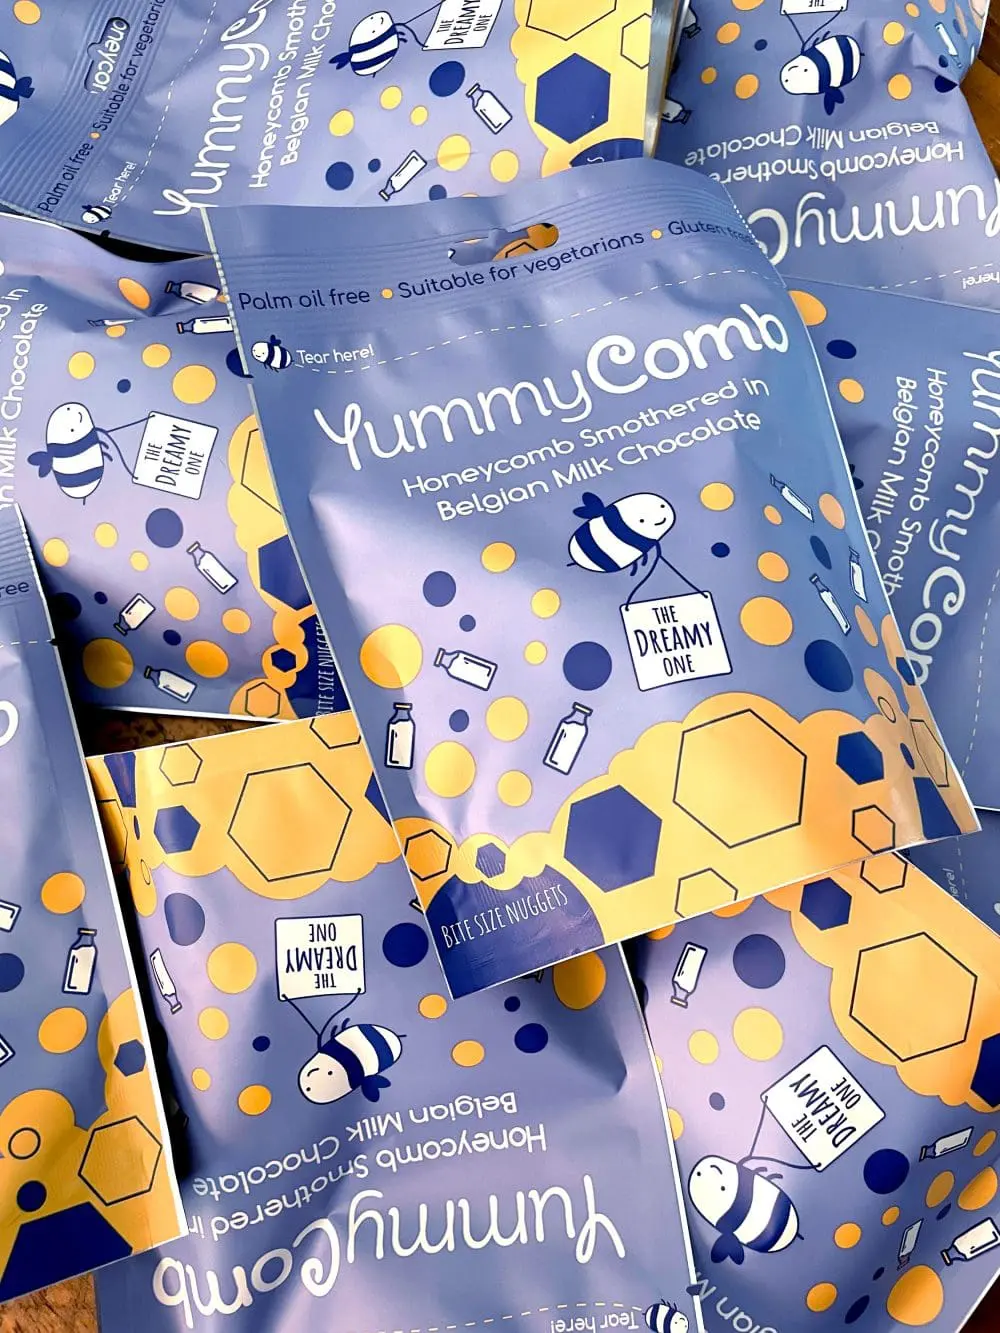 Yummycomb Honeycomb 100g pouch bag. Honeycomb smothered in premium Belgian Milk chocolate.